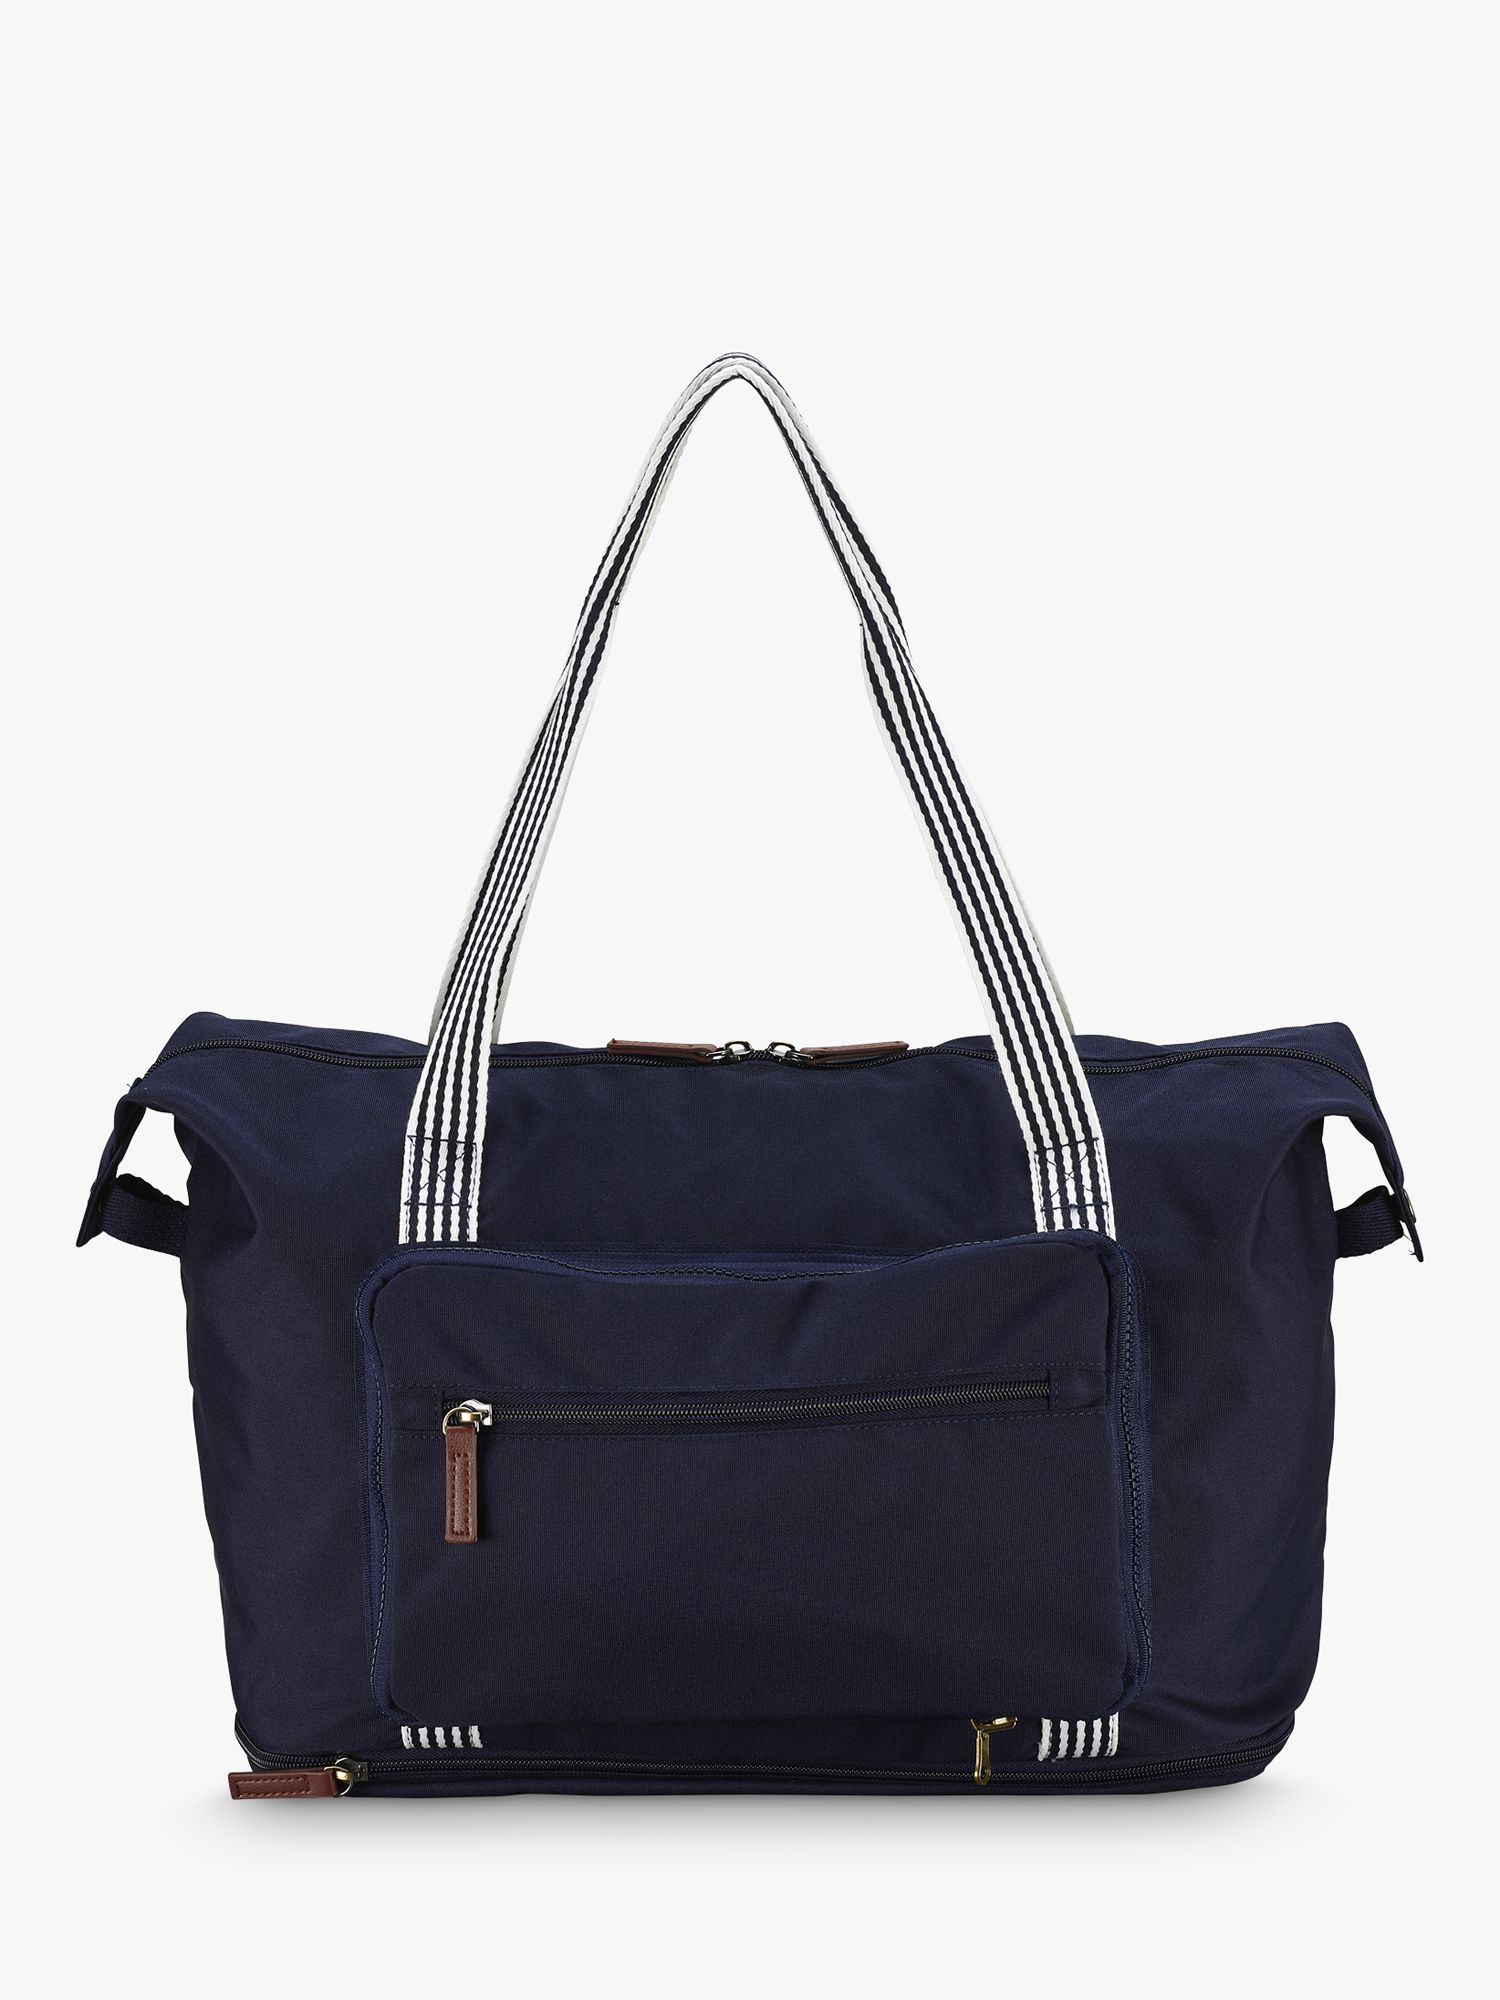 Joules Coast Collection Packaway Duffle Bag, French Navy at John Lewis ...